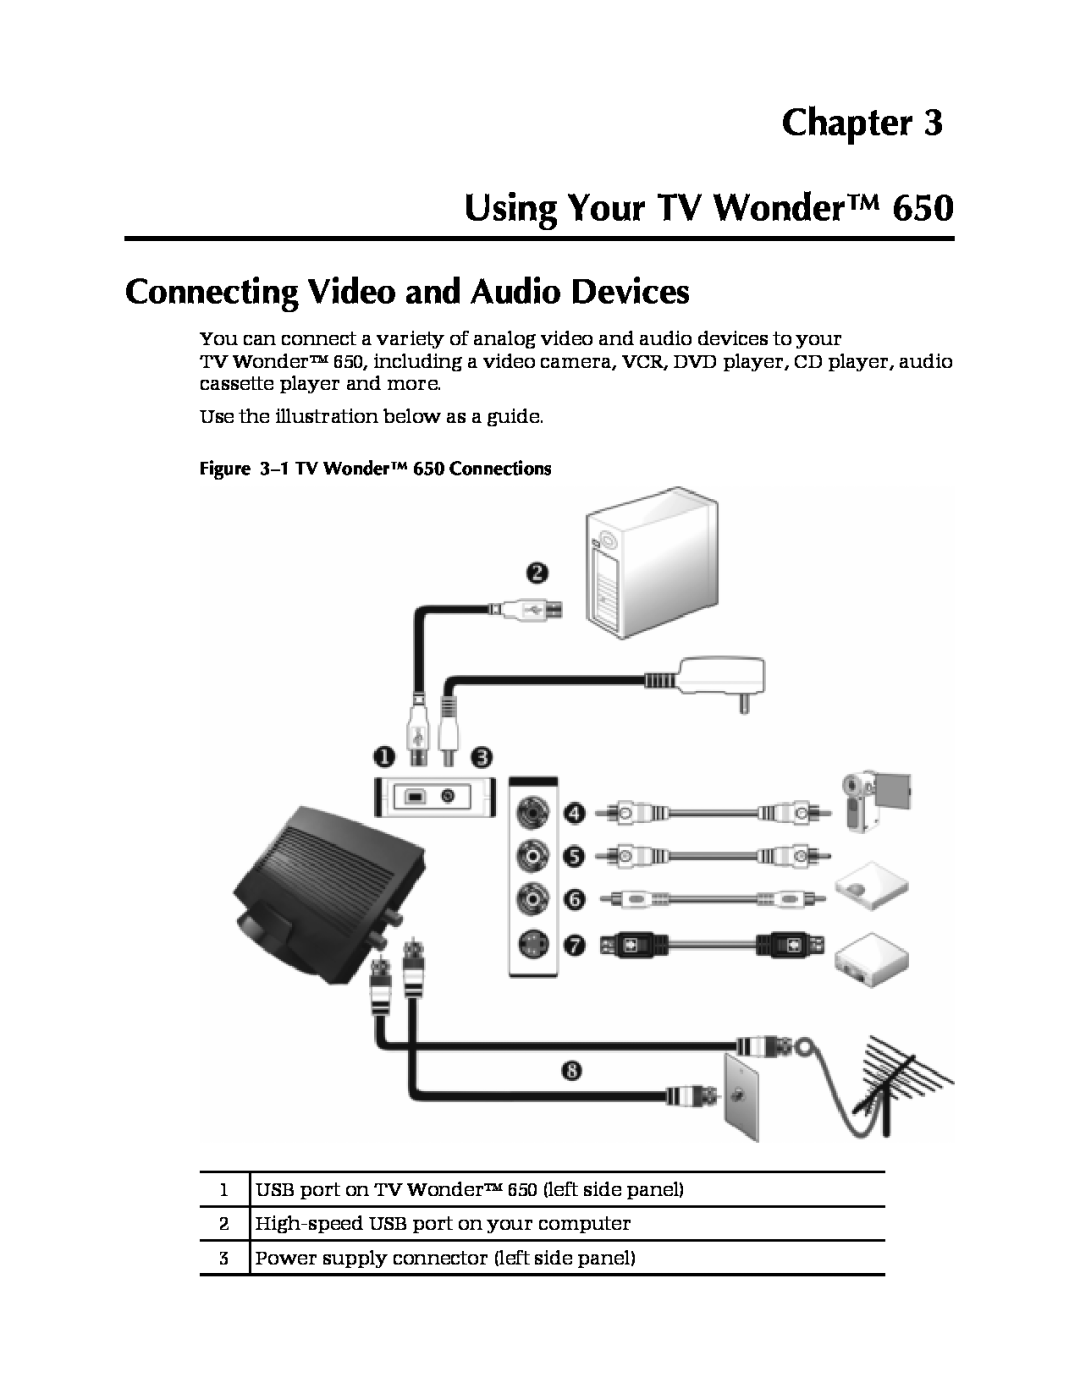 AMD manual Chapter Using Your TV Wonder, Connecting Video and Audio Devices, 1TV Wonder 650 Connections 